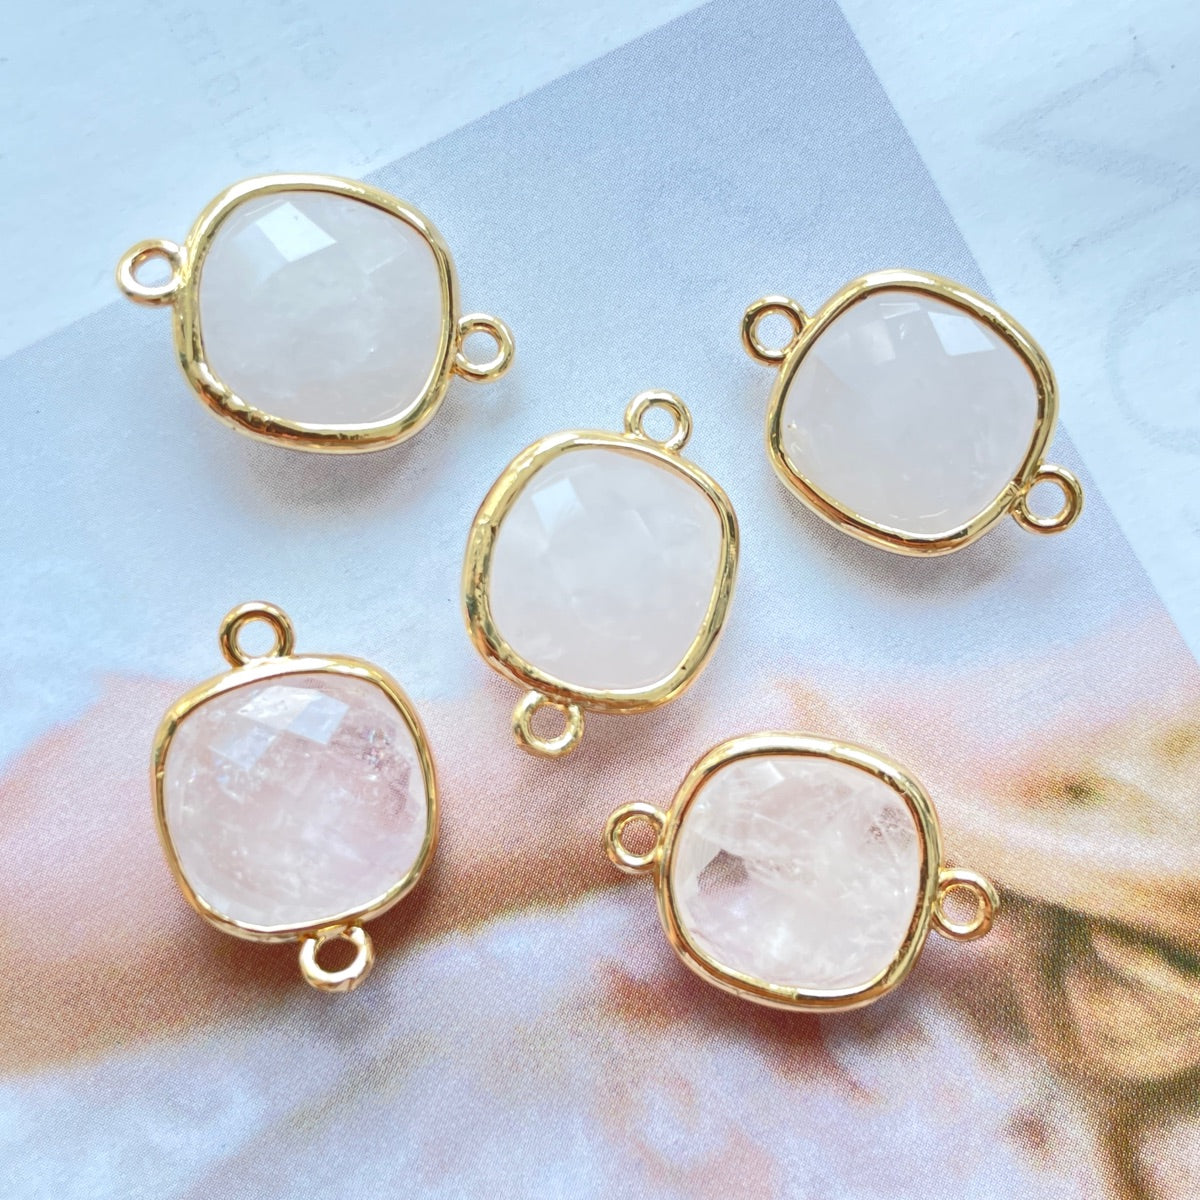 5pcs Druzy Agate Slice Connectors,gold Metal Natural Druzy Gemstone Sun  Flower Connectors Beads in White Color,for Making Jewelry 